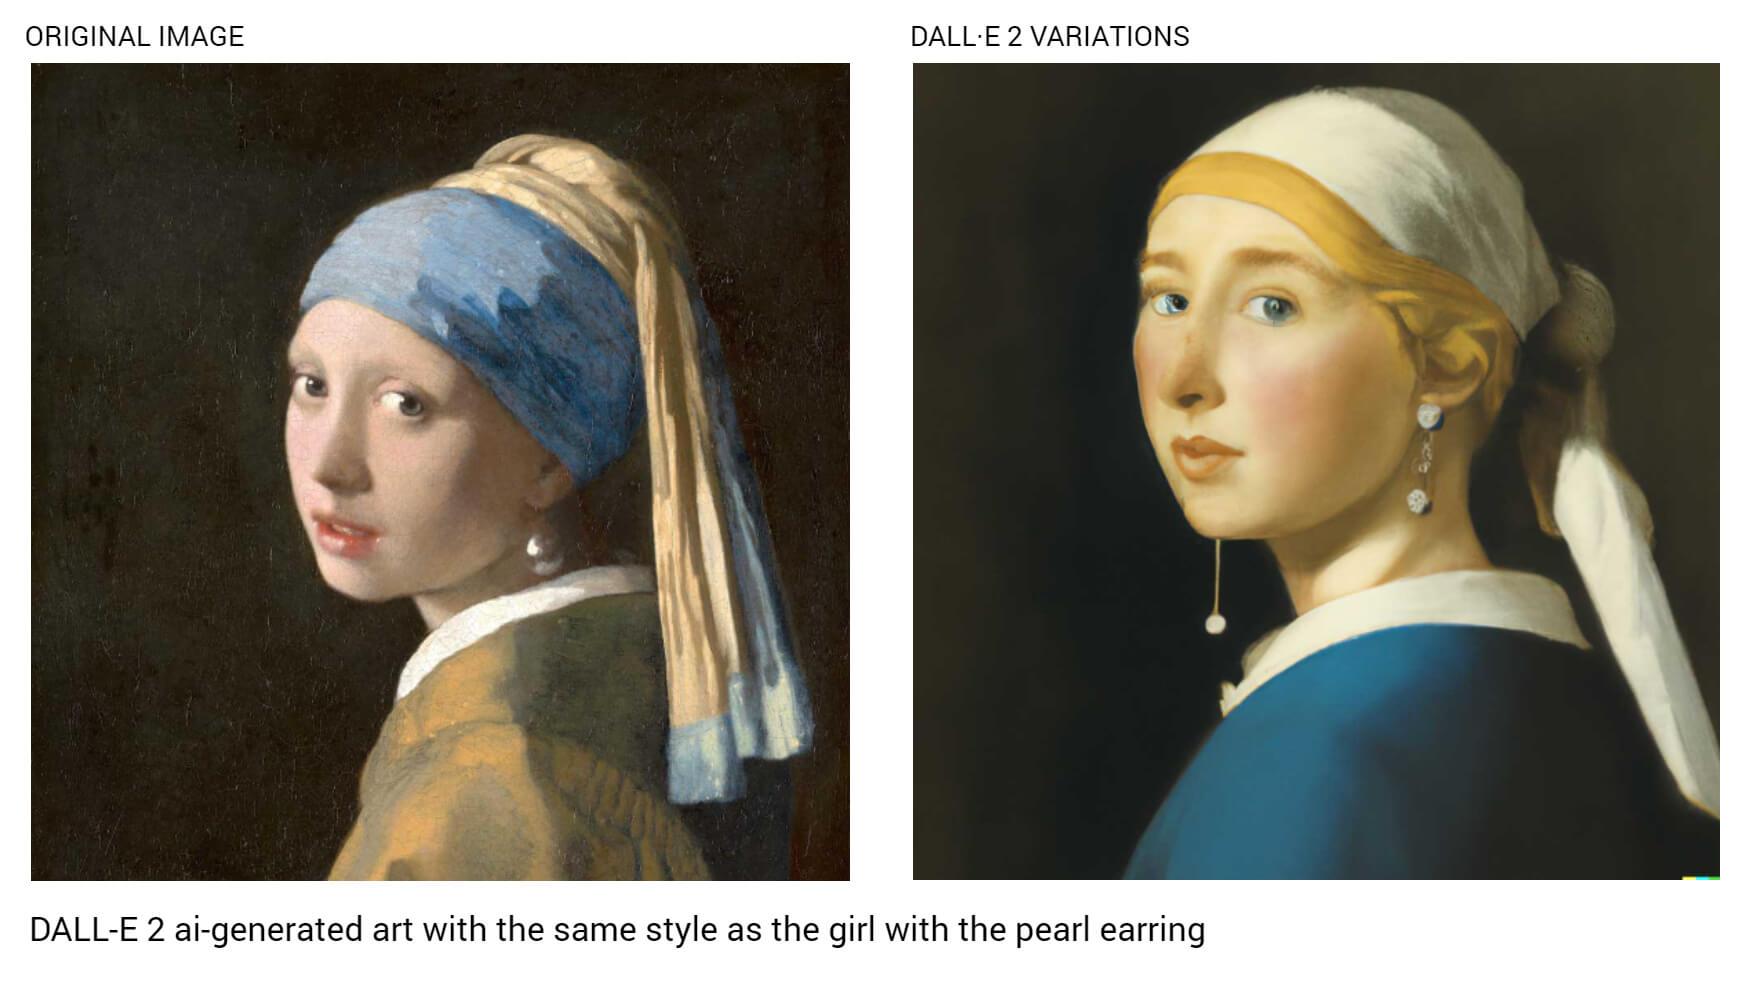 DALL-E 2 ai-generated art with the same style as the girl with the pearl earring